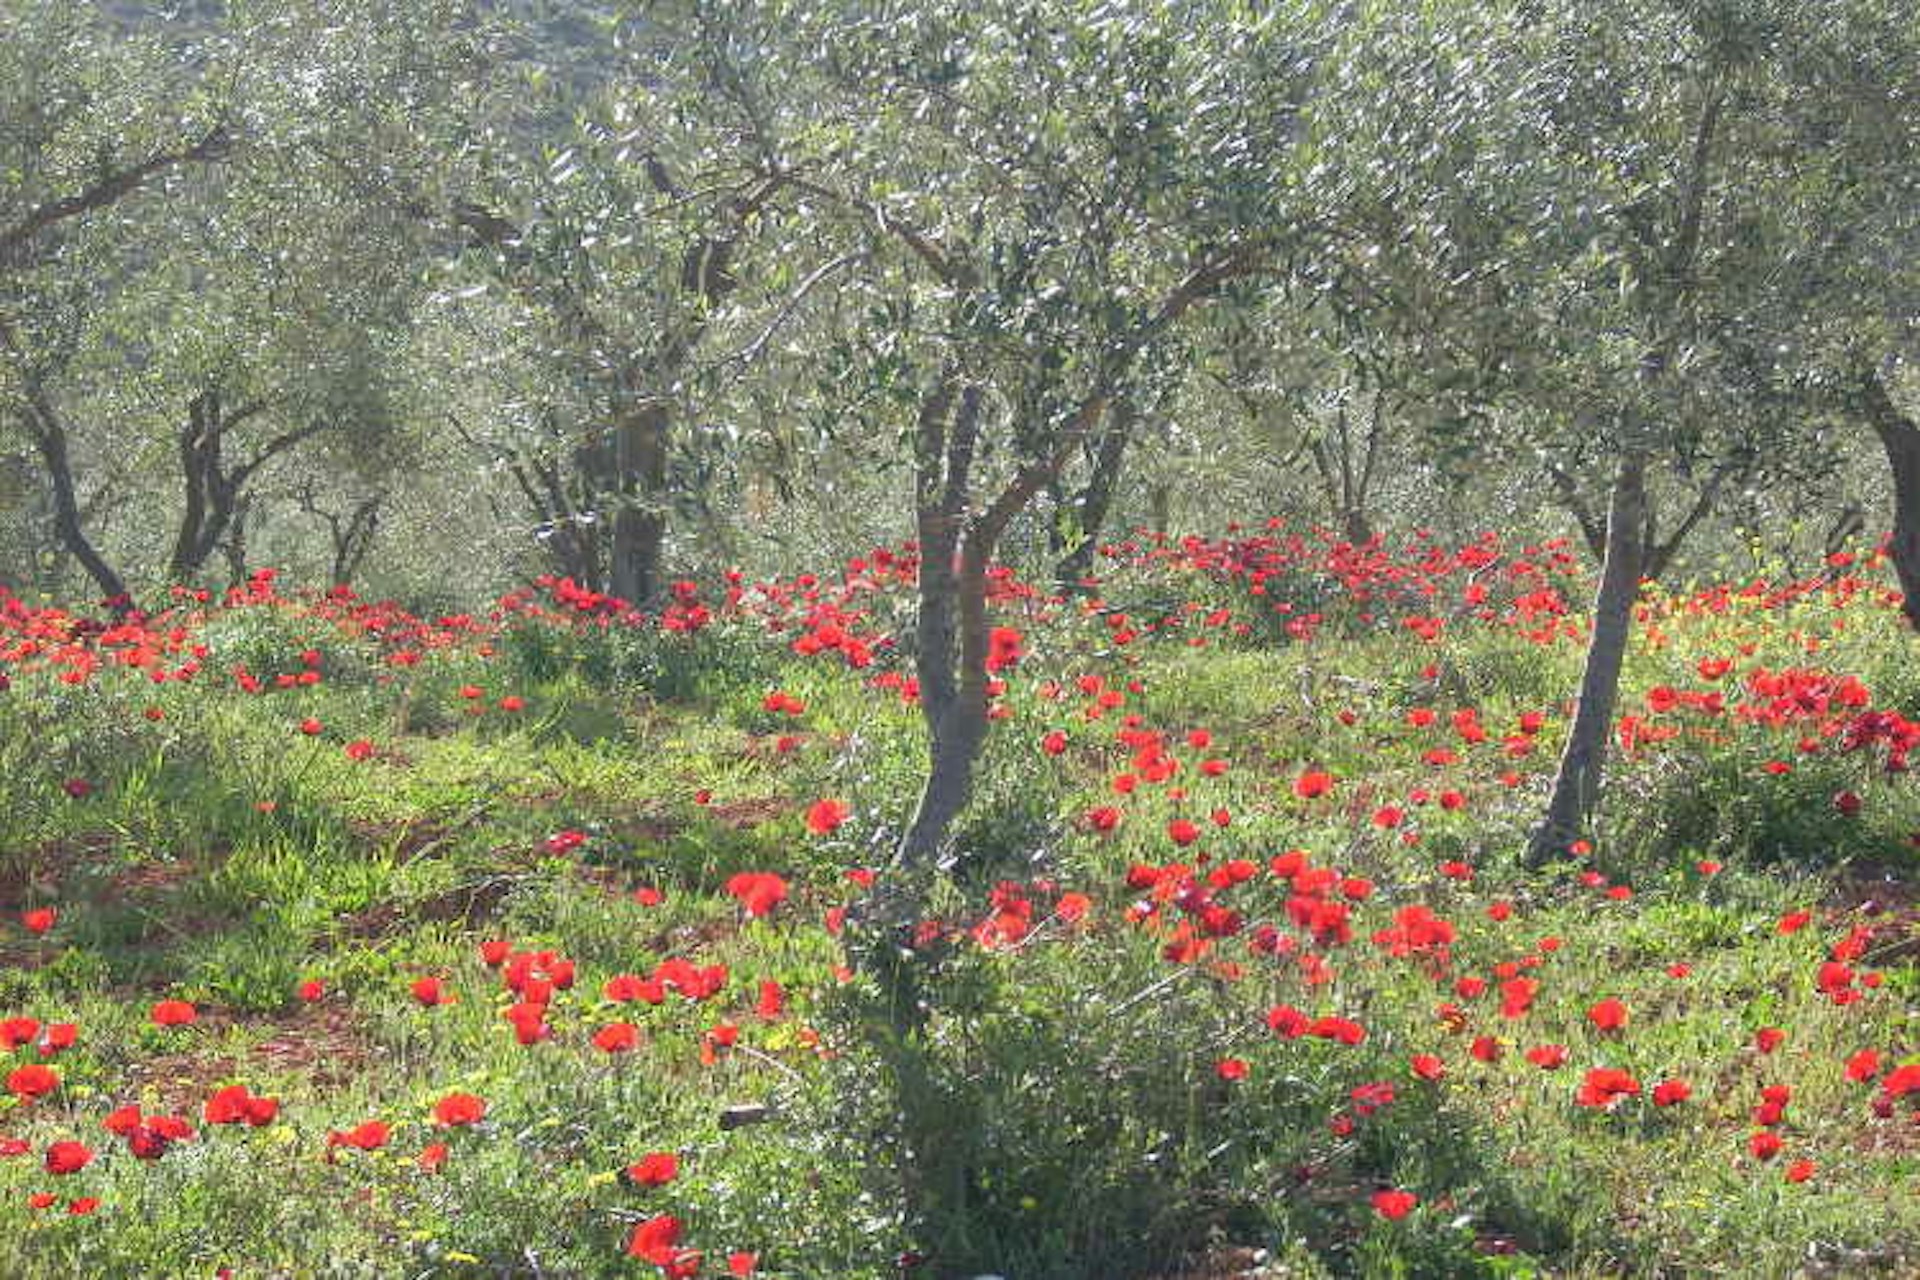 Crimson poppies fill olive groves in the Peloponnese. Image by Alexis Averbuck / Lonely Planet